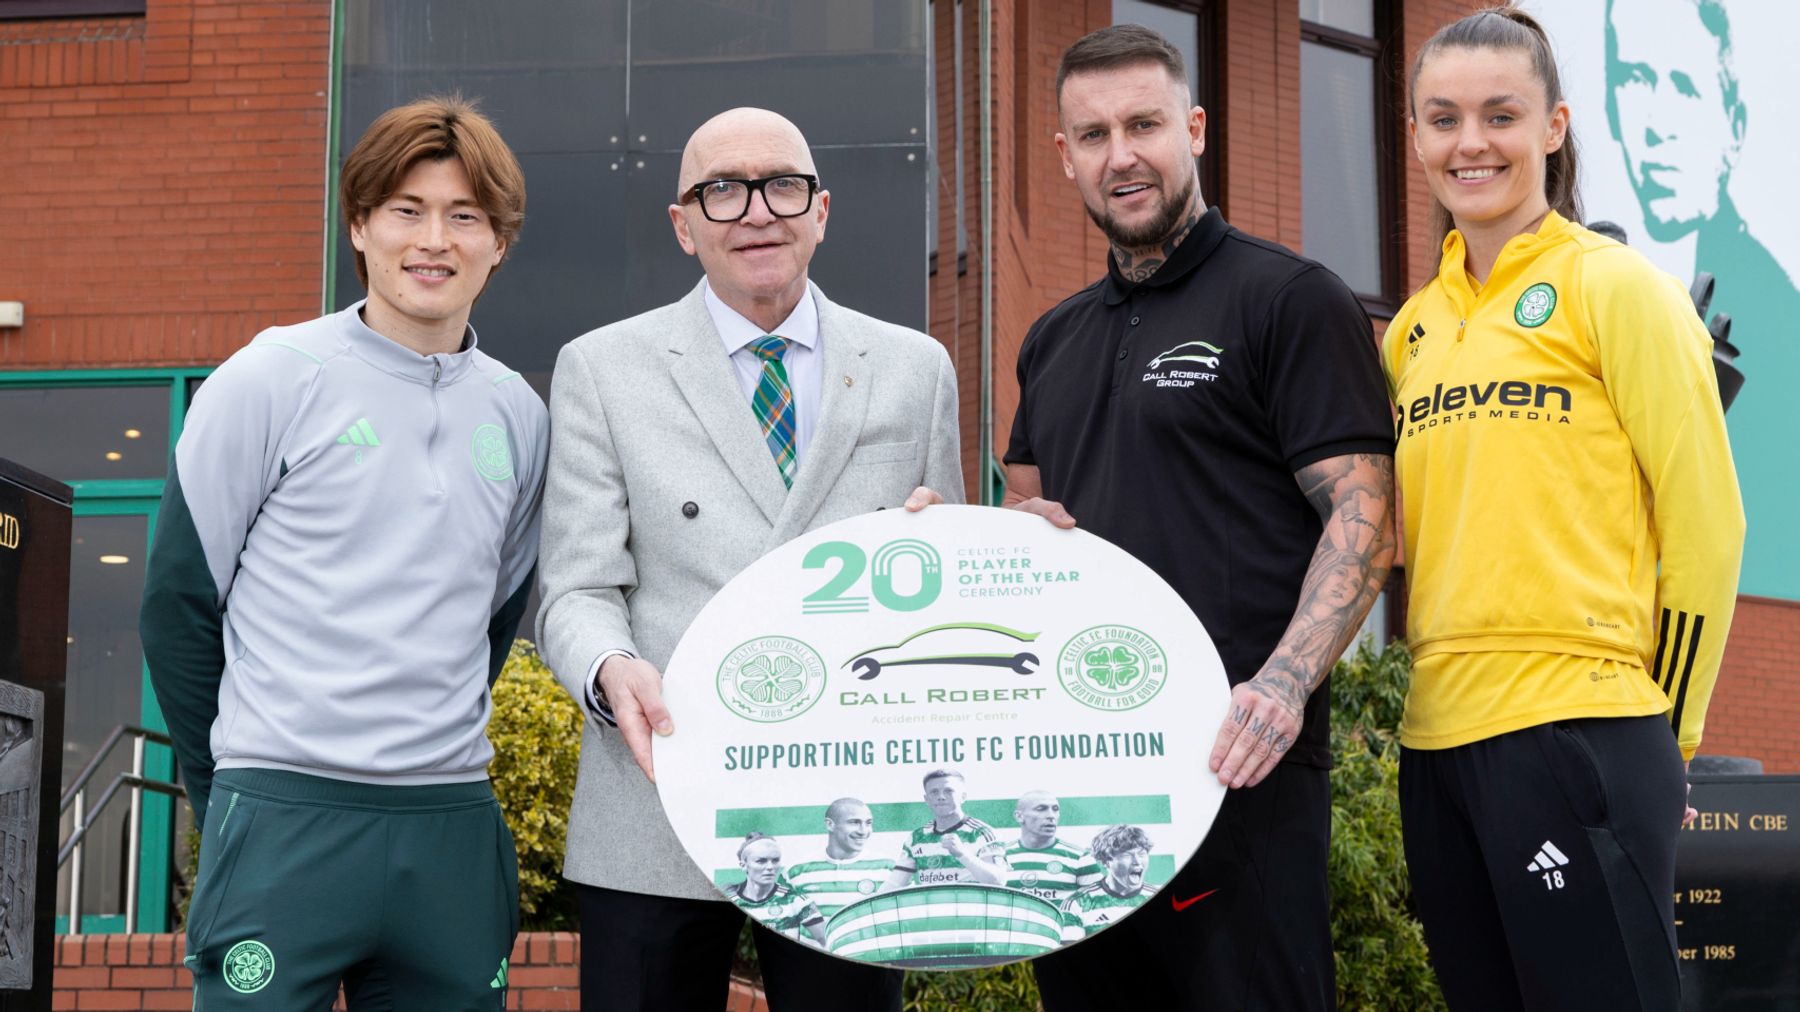 Call Robert boost to Celtic FC Foundation with support of 20th Player of the Year spectacular